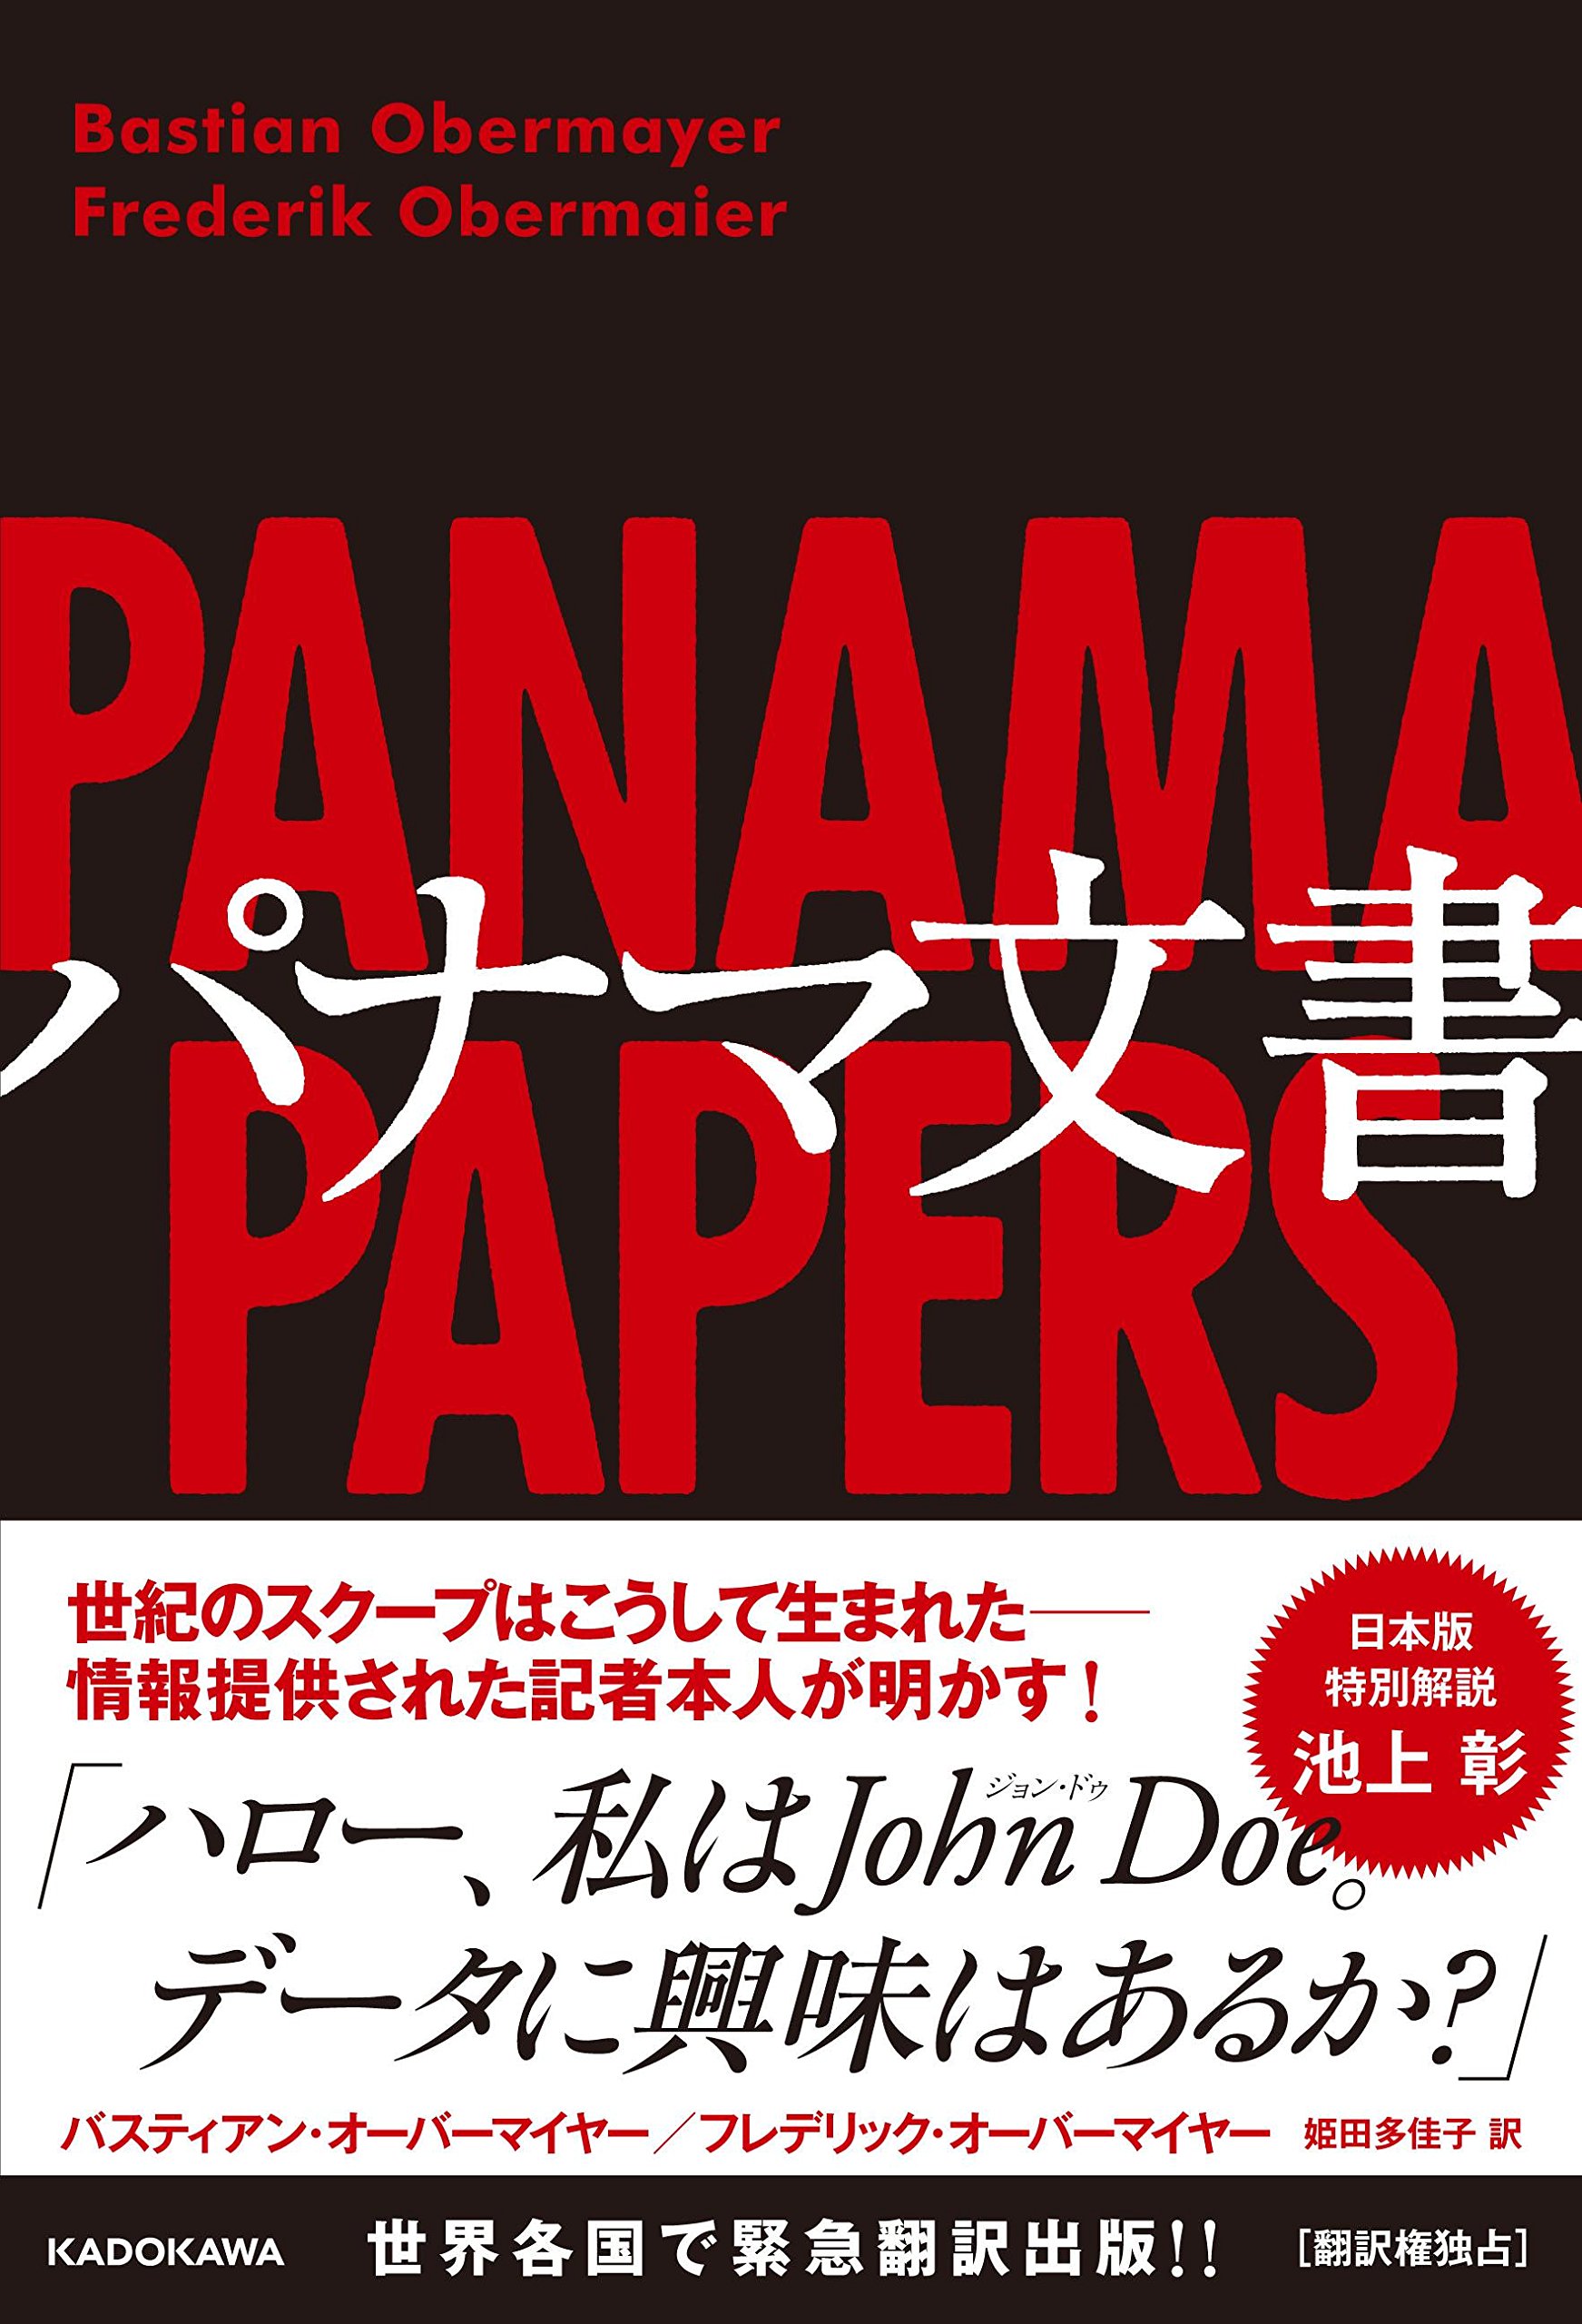 『Panama Papers』- References